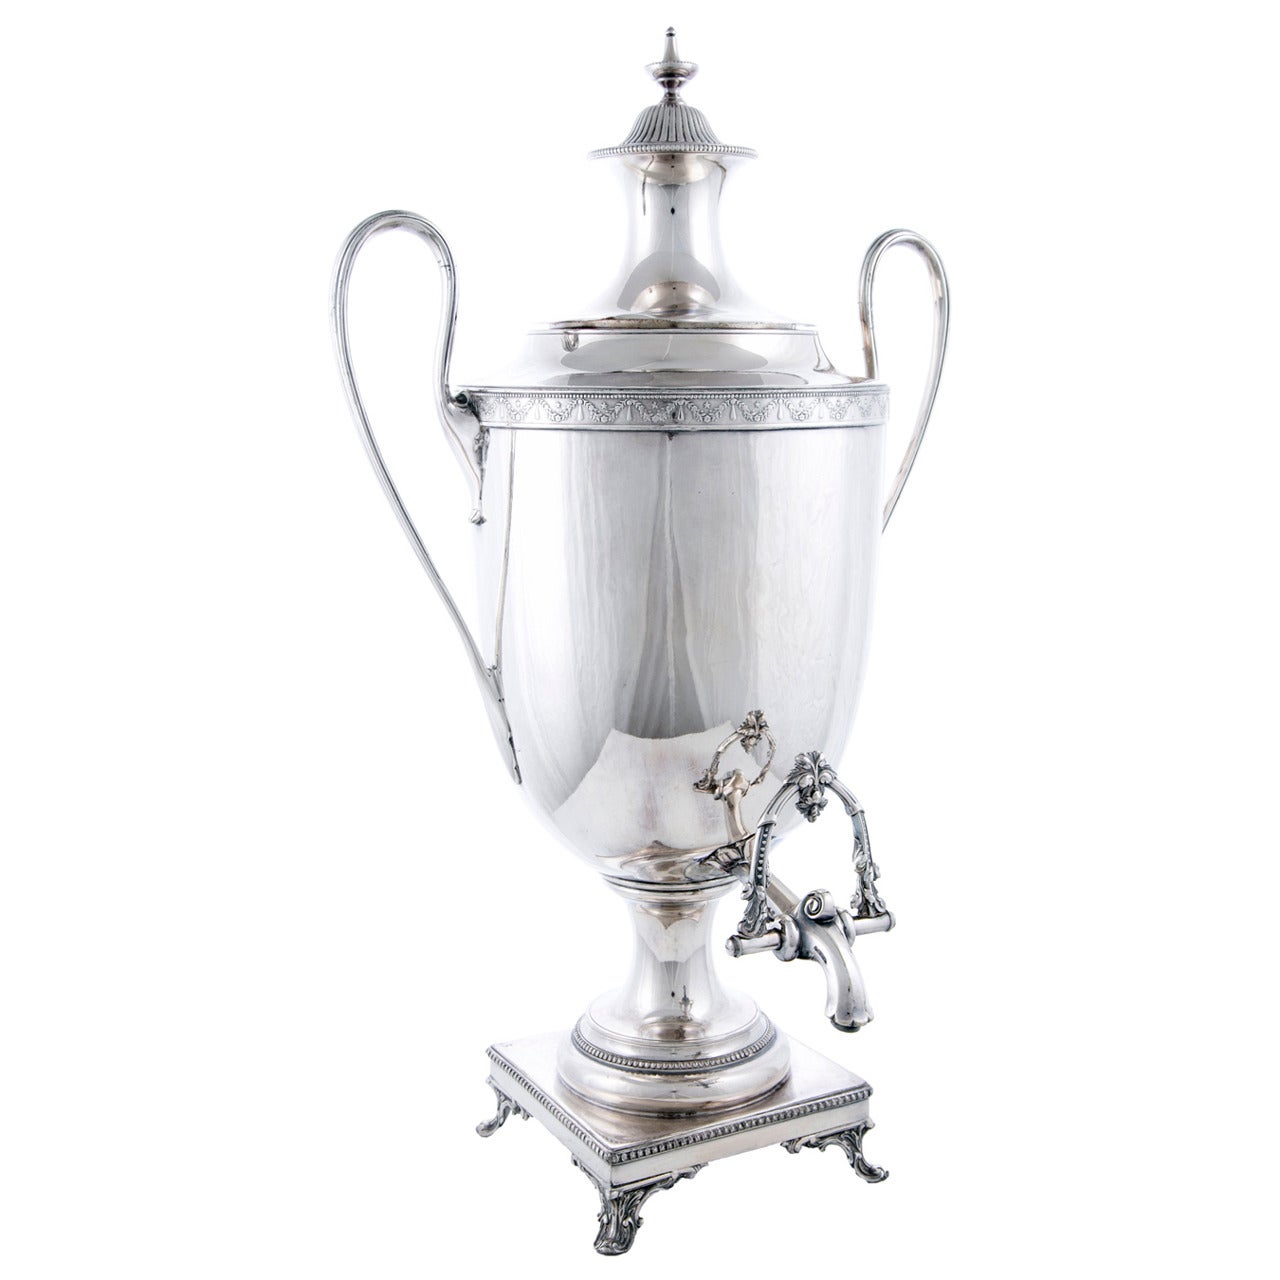 Victorian English Silver Plate Hot Water Urn